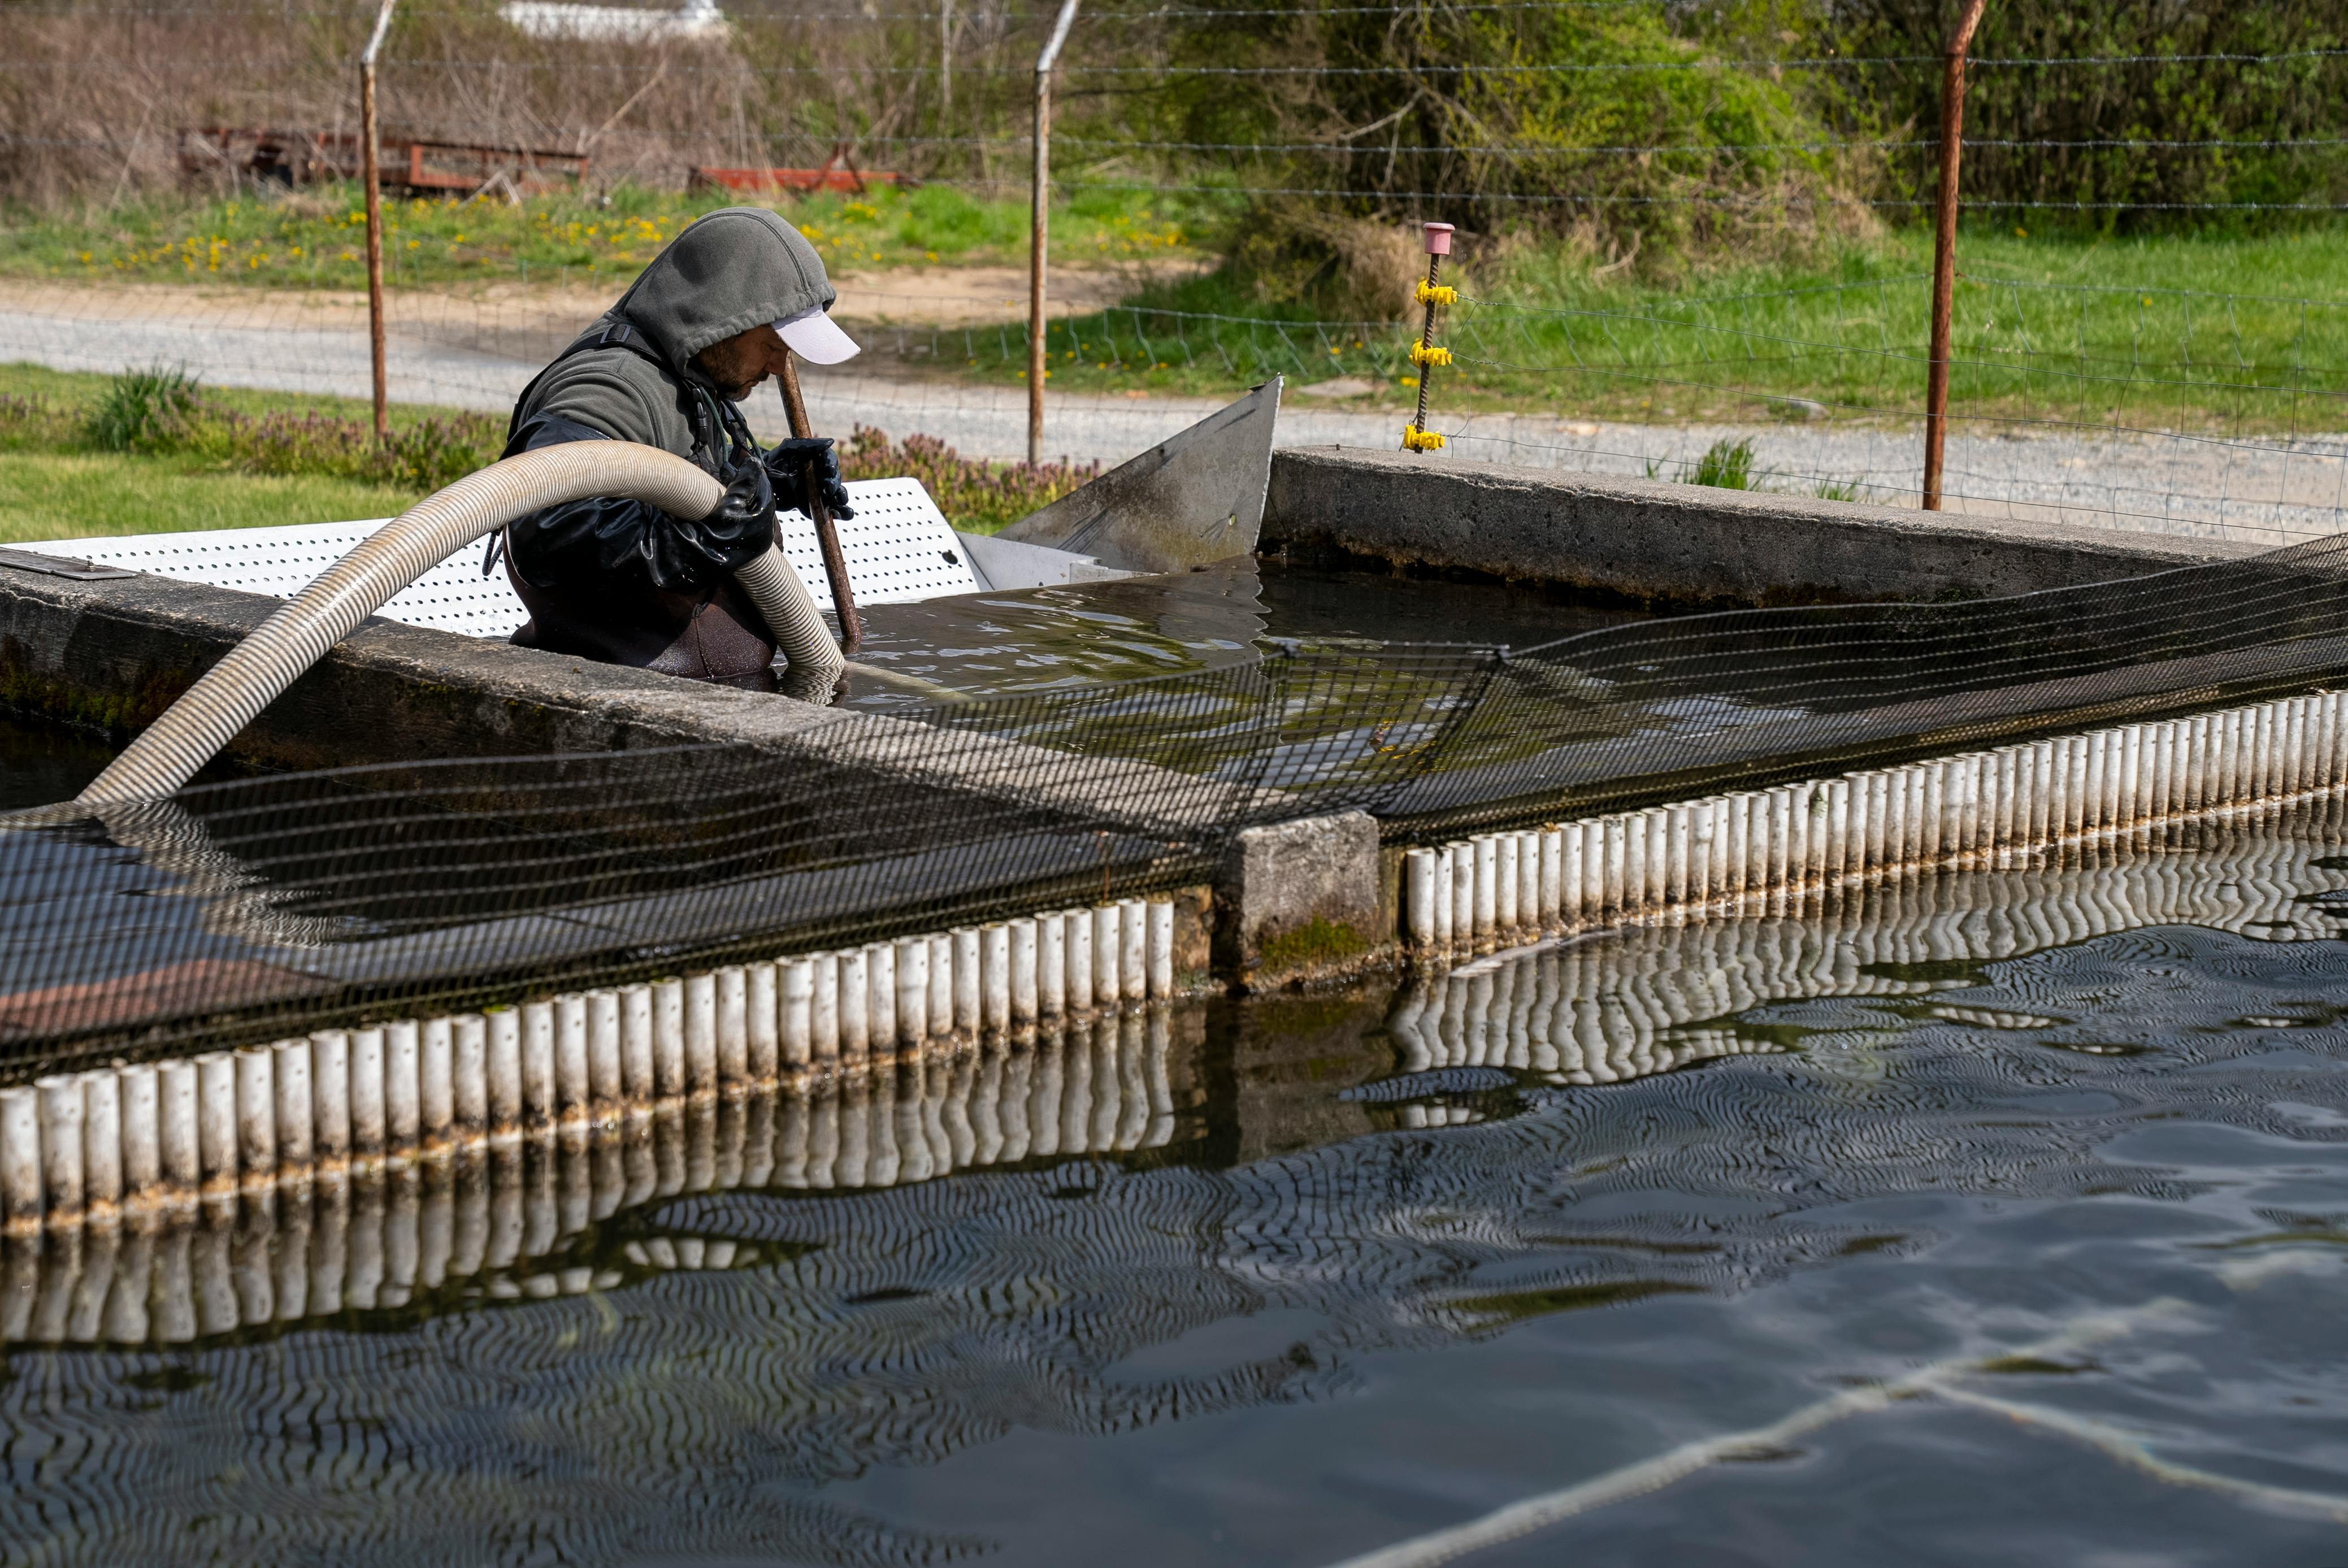 A man cleaning a pond